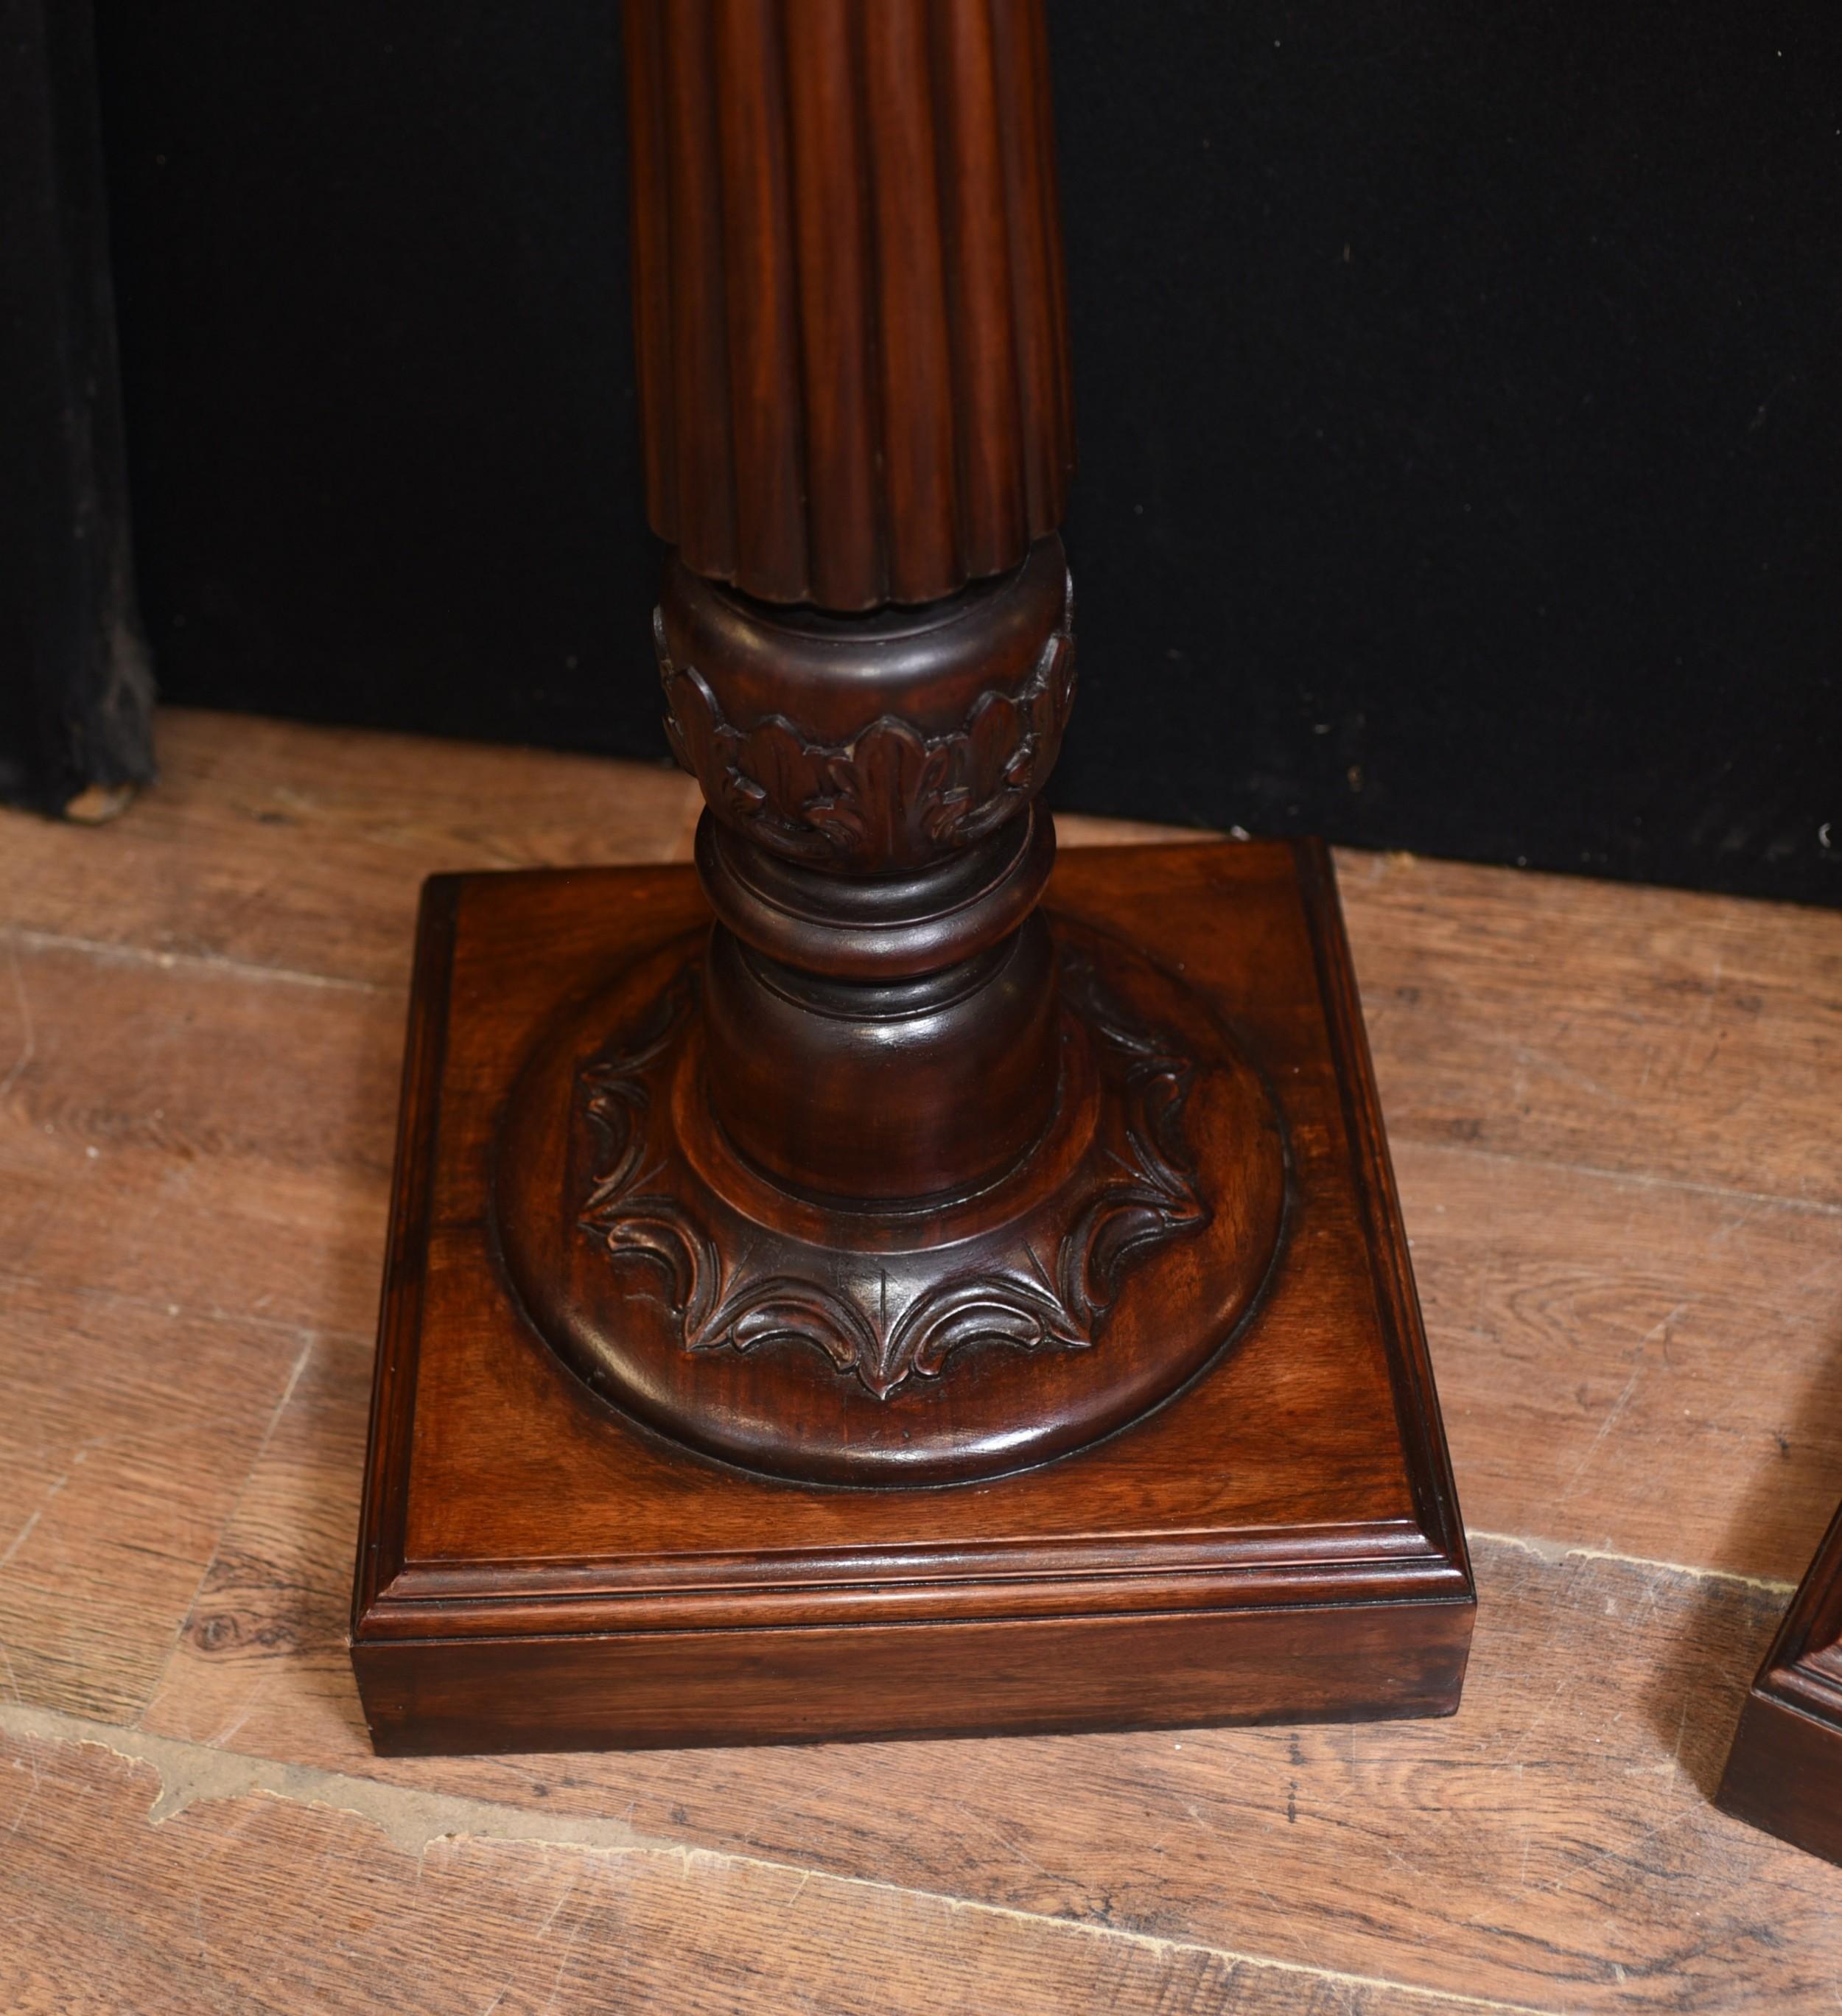 - Gorgeous pair of Regency style mahogany pedestal stands
- Classical columns perfect for displaying busts, vases or other decorative pieces
- Hand carved details very ornate and florid
- Vases shown are available but not included in the